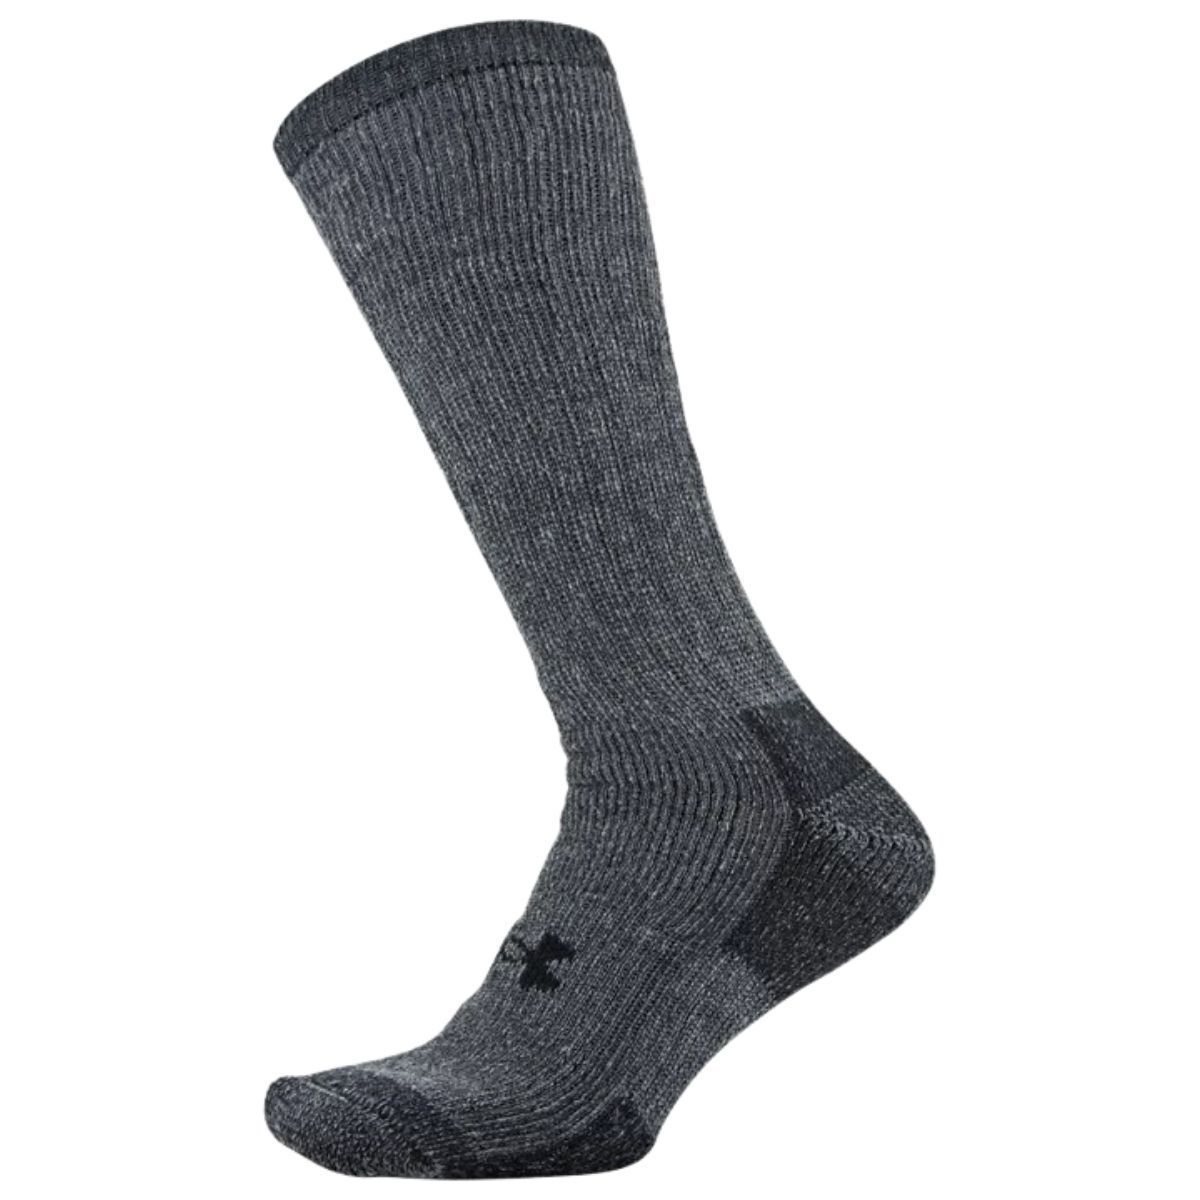 15 Best Men’s Wool Socks in 2023: Pairs for All Types of Needs